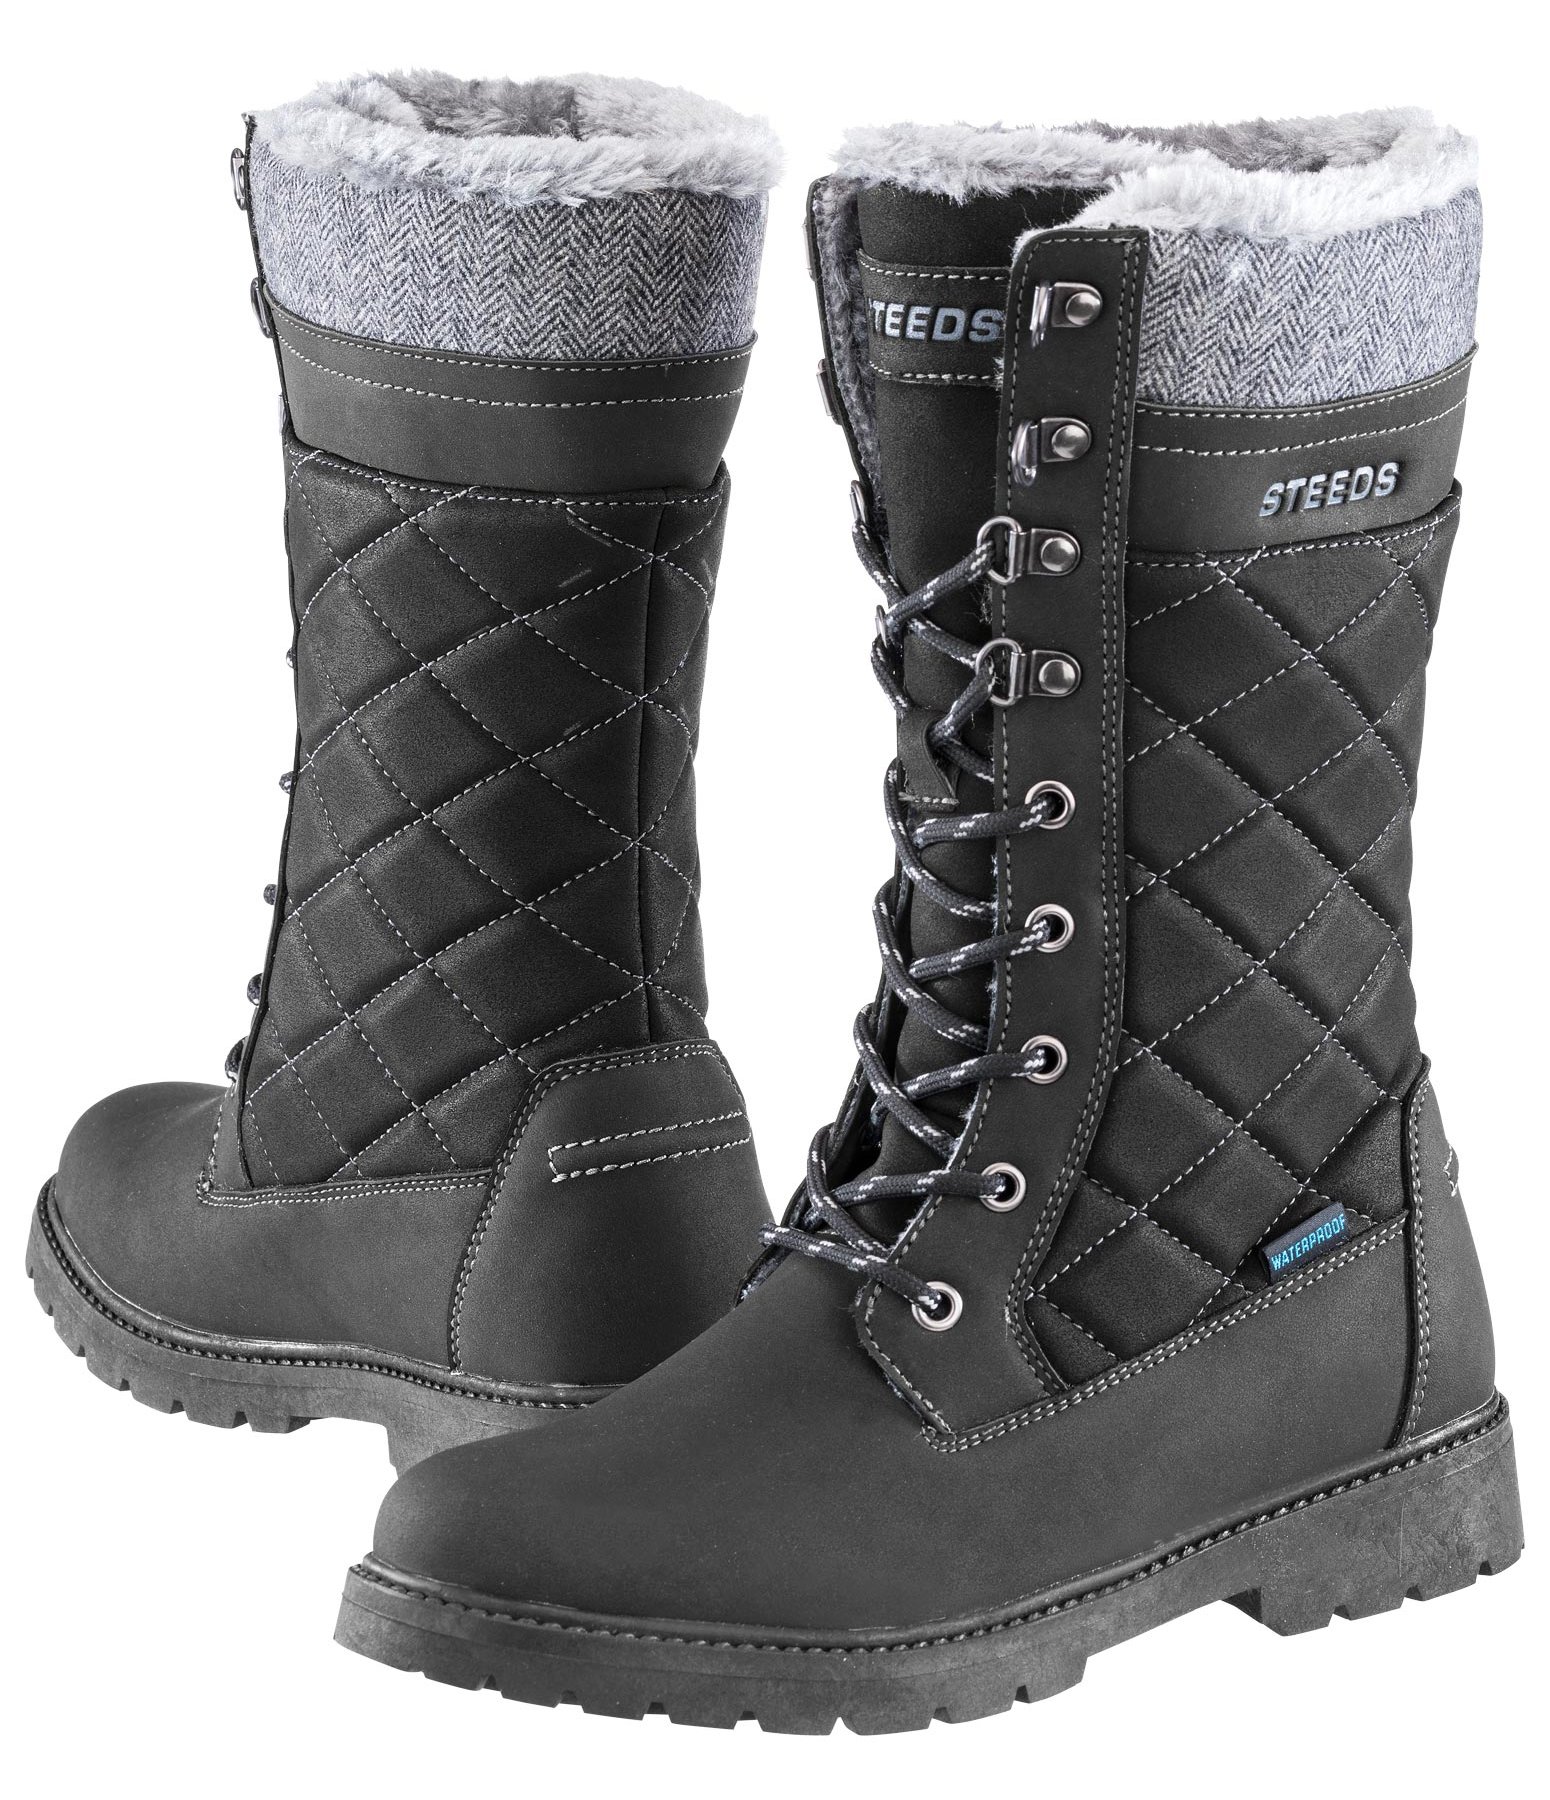 Winter Stable Boots Tundra